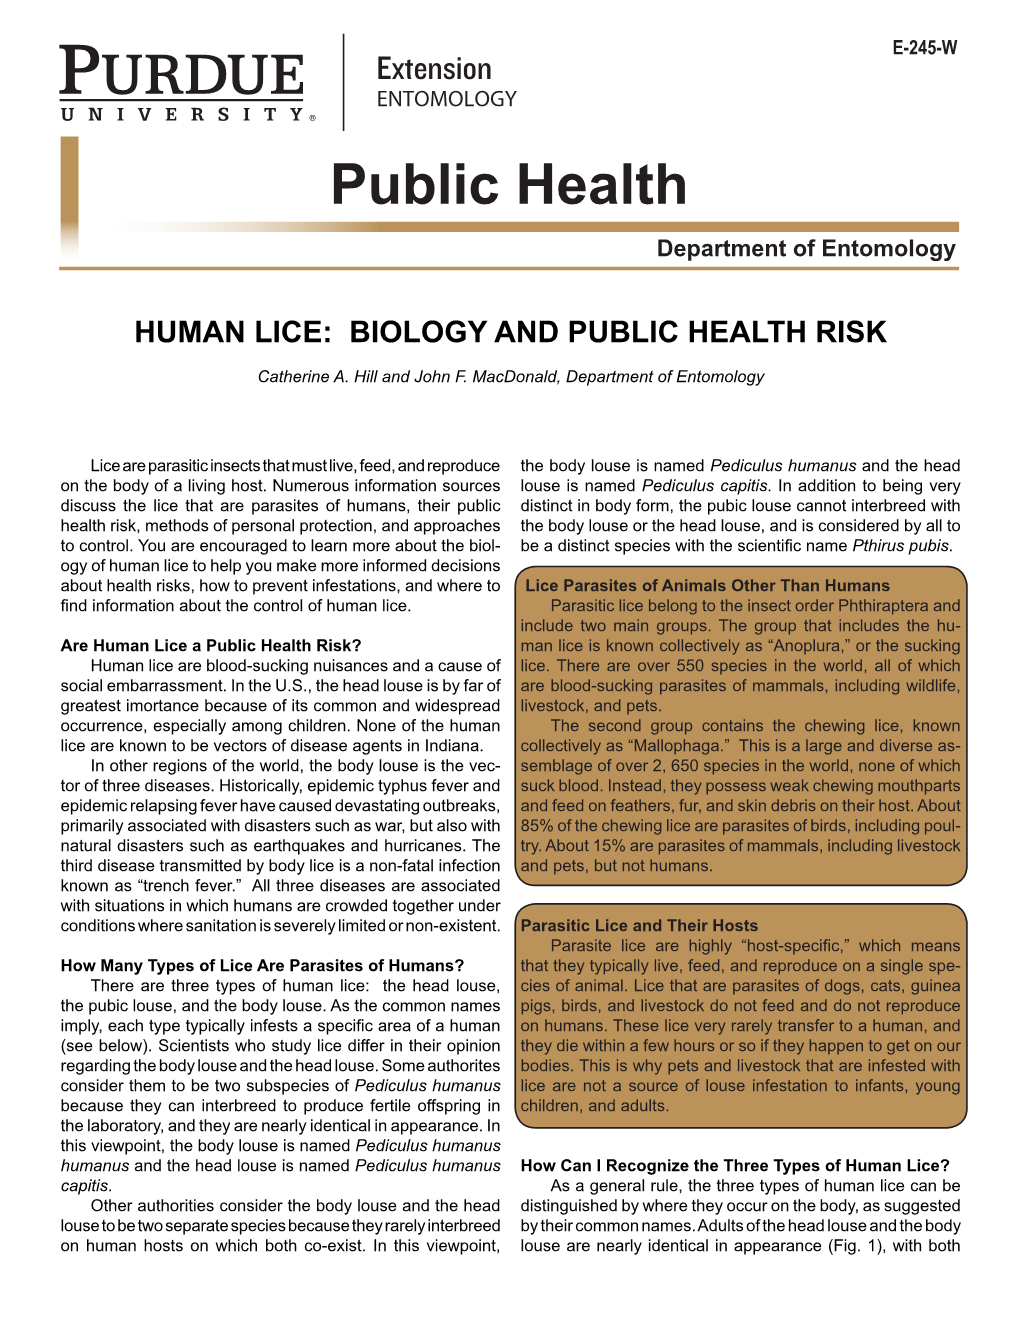 Human Lice: Biology and Public Health Risk